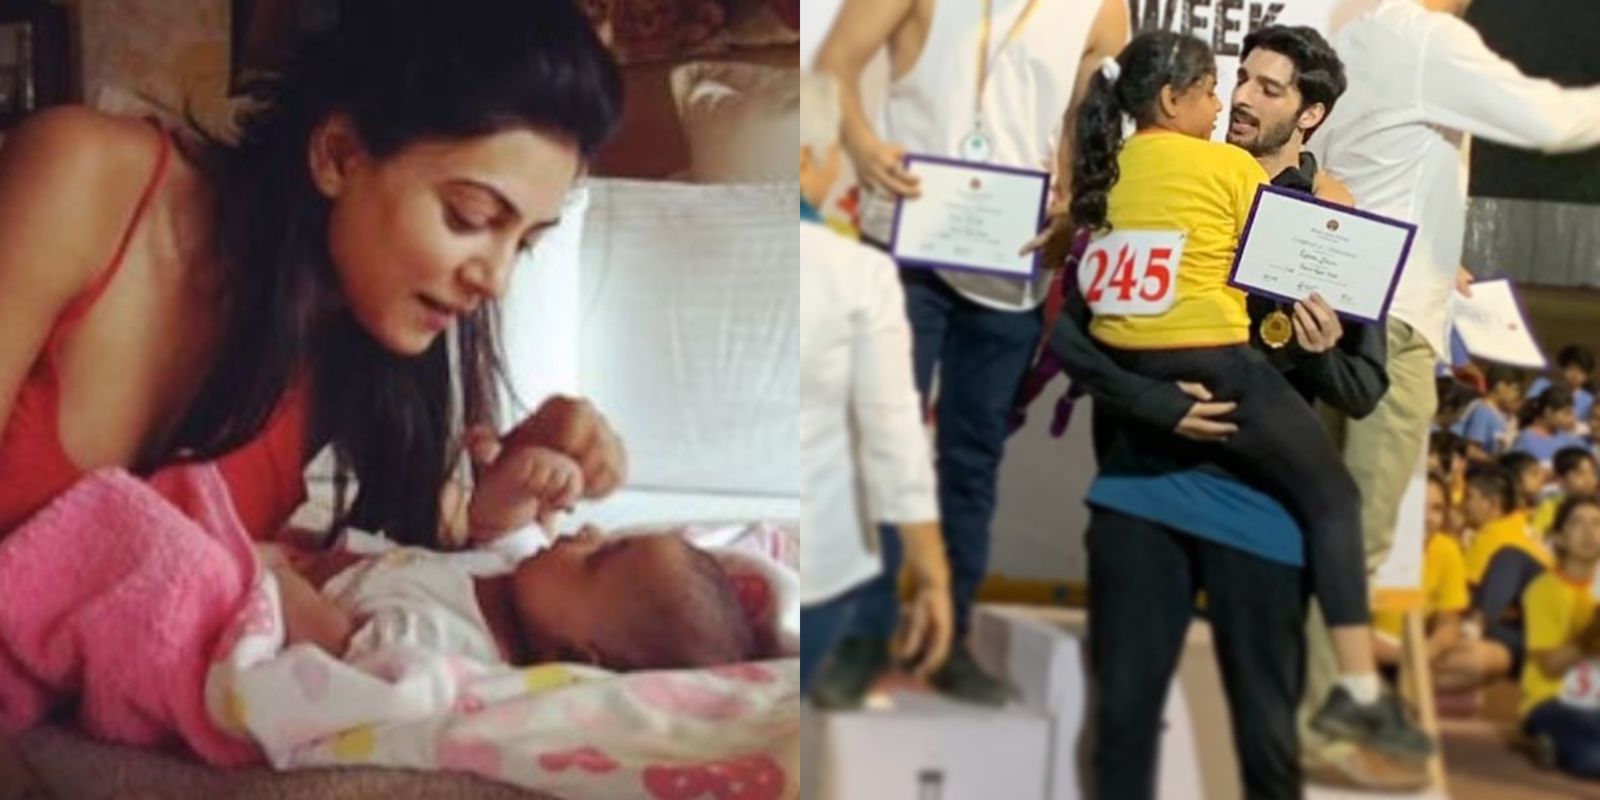 Sushmita Sen's Daughter Alisah Turns 11, Boyfriend Rohman Shawl Says 'Thank You For Giving Me The Gift Of LIFE' 